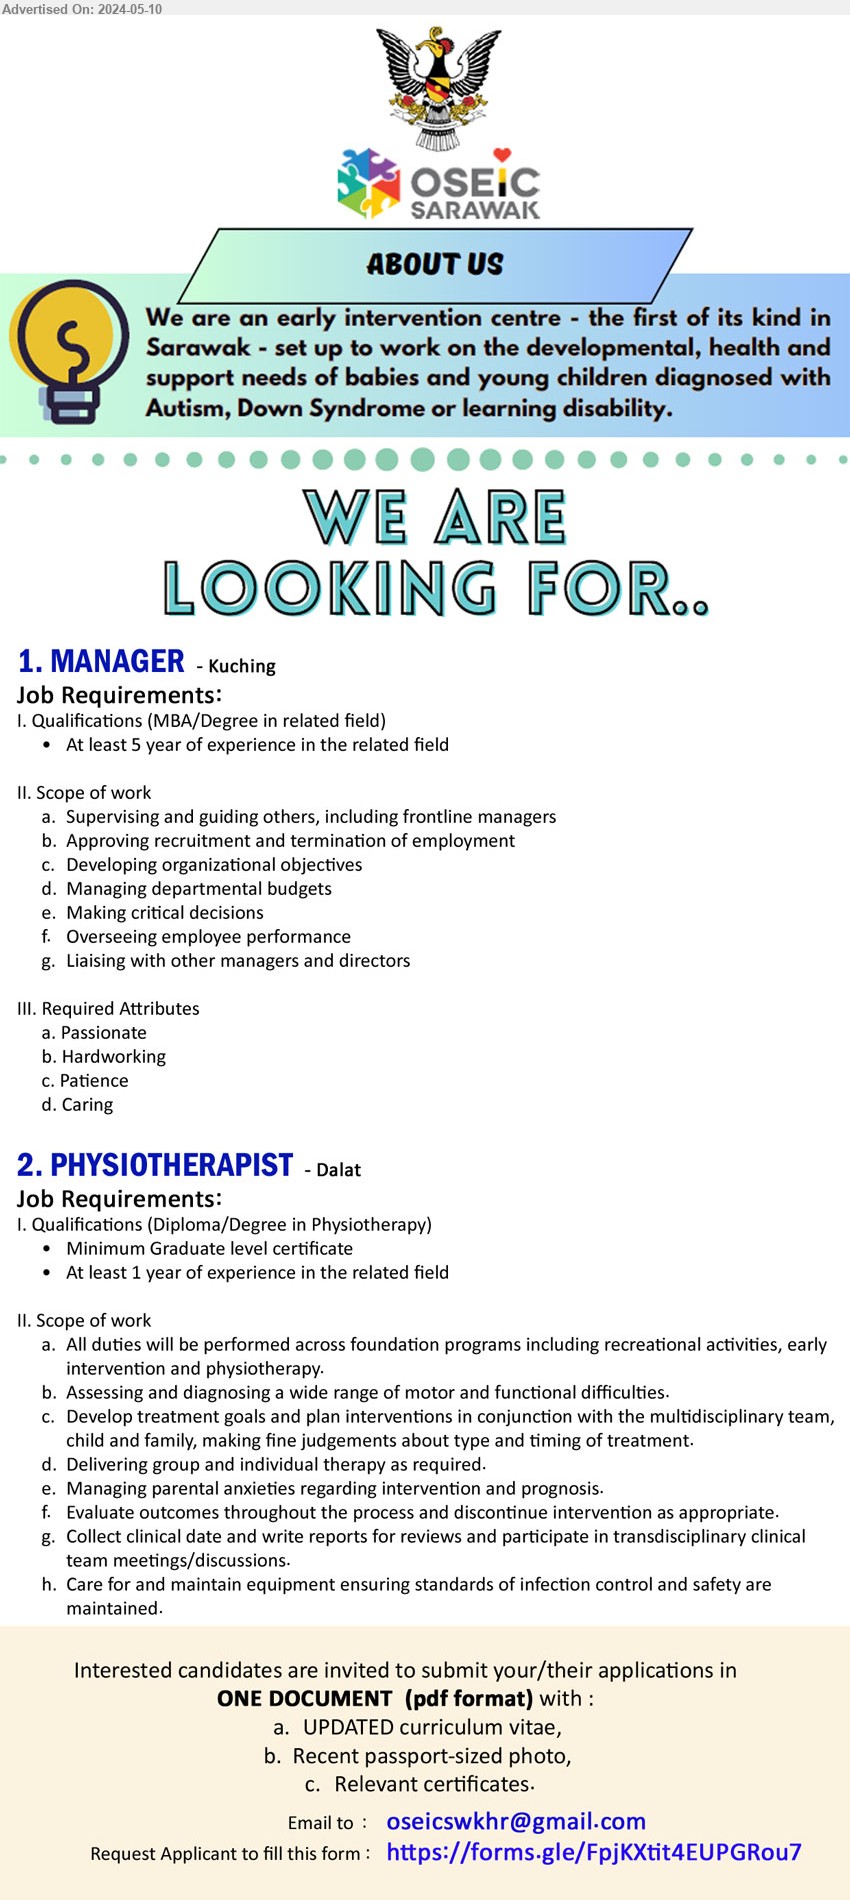 OSEIC SARAWAK - 1. MANAGER   (Kuching), MBA/Degree in related field, 5 yrs. exp., Supervising and guiding others, including frontline managers,...
2. PHYSIOTHERAPIST   (Dalat), Diploma/Degree in Physiotherapy, 1 yr. exp., assessing and diagnosing a wide range of motor and functional difficulties.,...
Email resume to ...